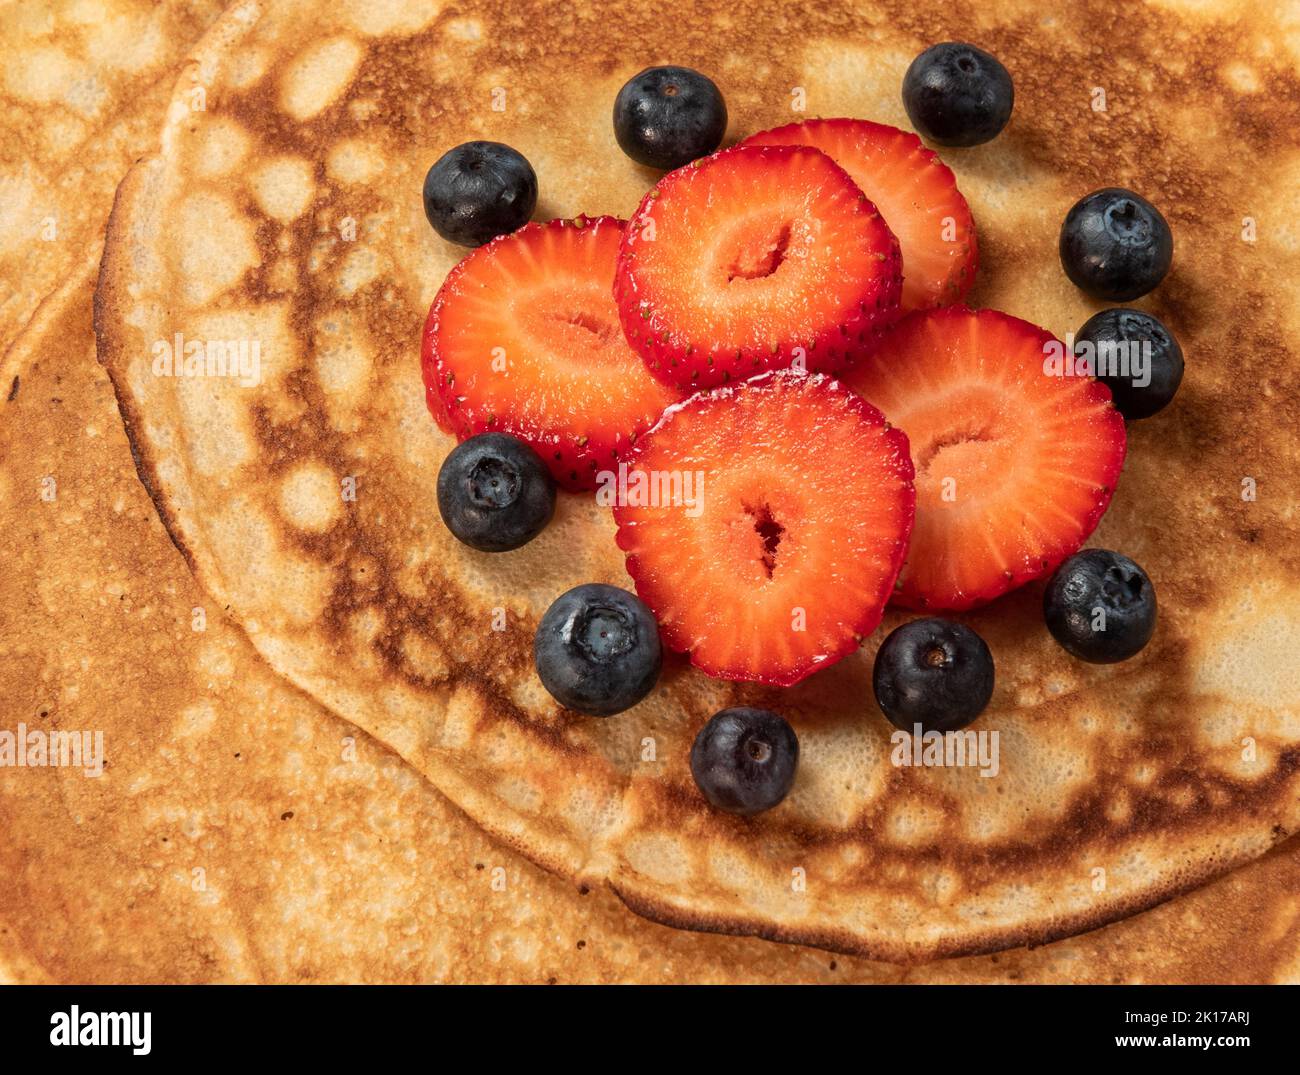 Pancakes with strawberries and blueberries close up Stock Photo